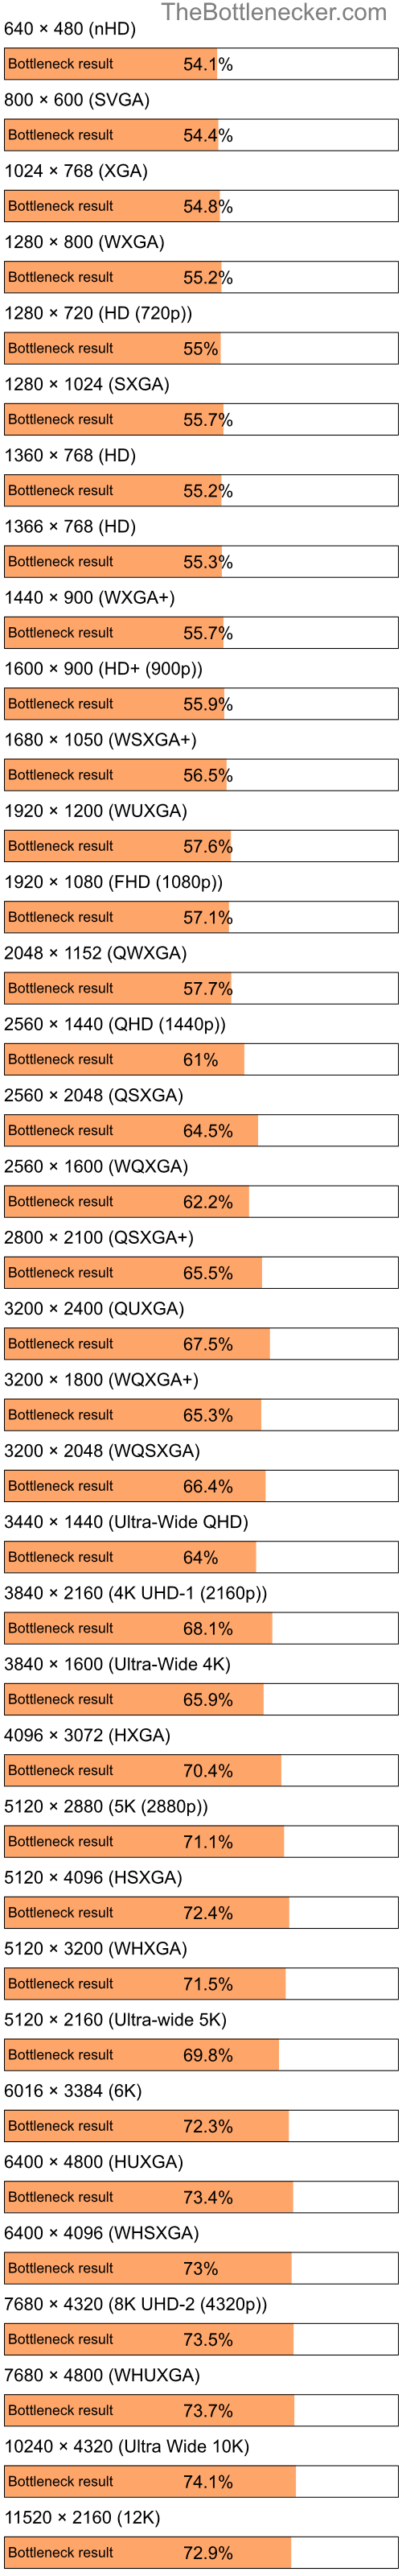 Bottleneck results by resolution for Intel Atom Z520 and AMD Mobility Radeon X1600 in Processor Intense Tasks